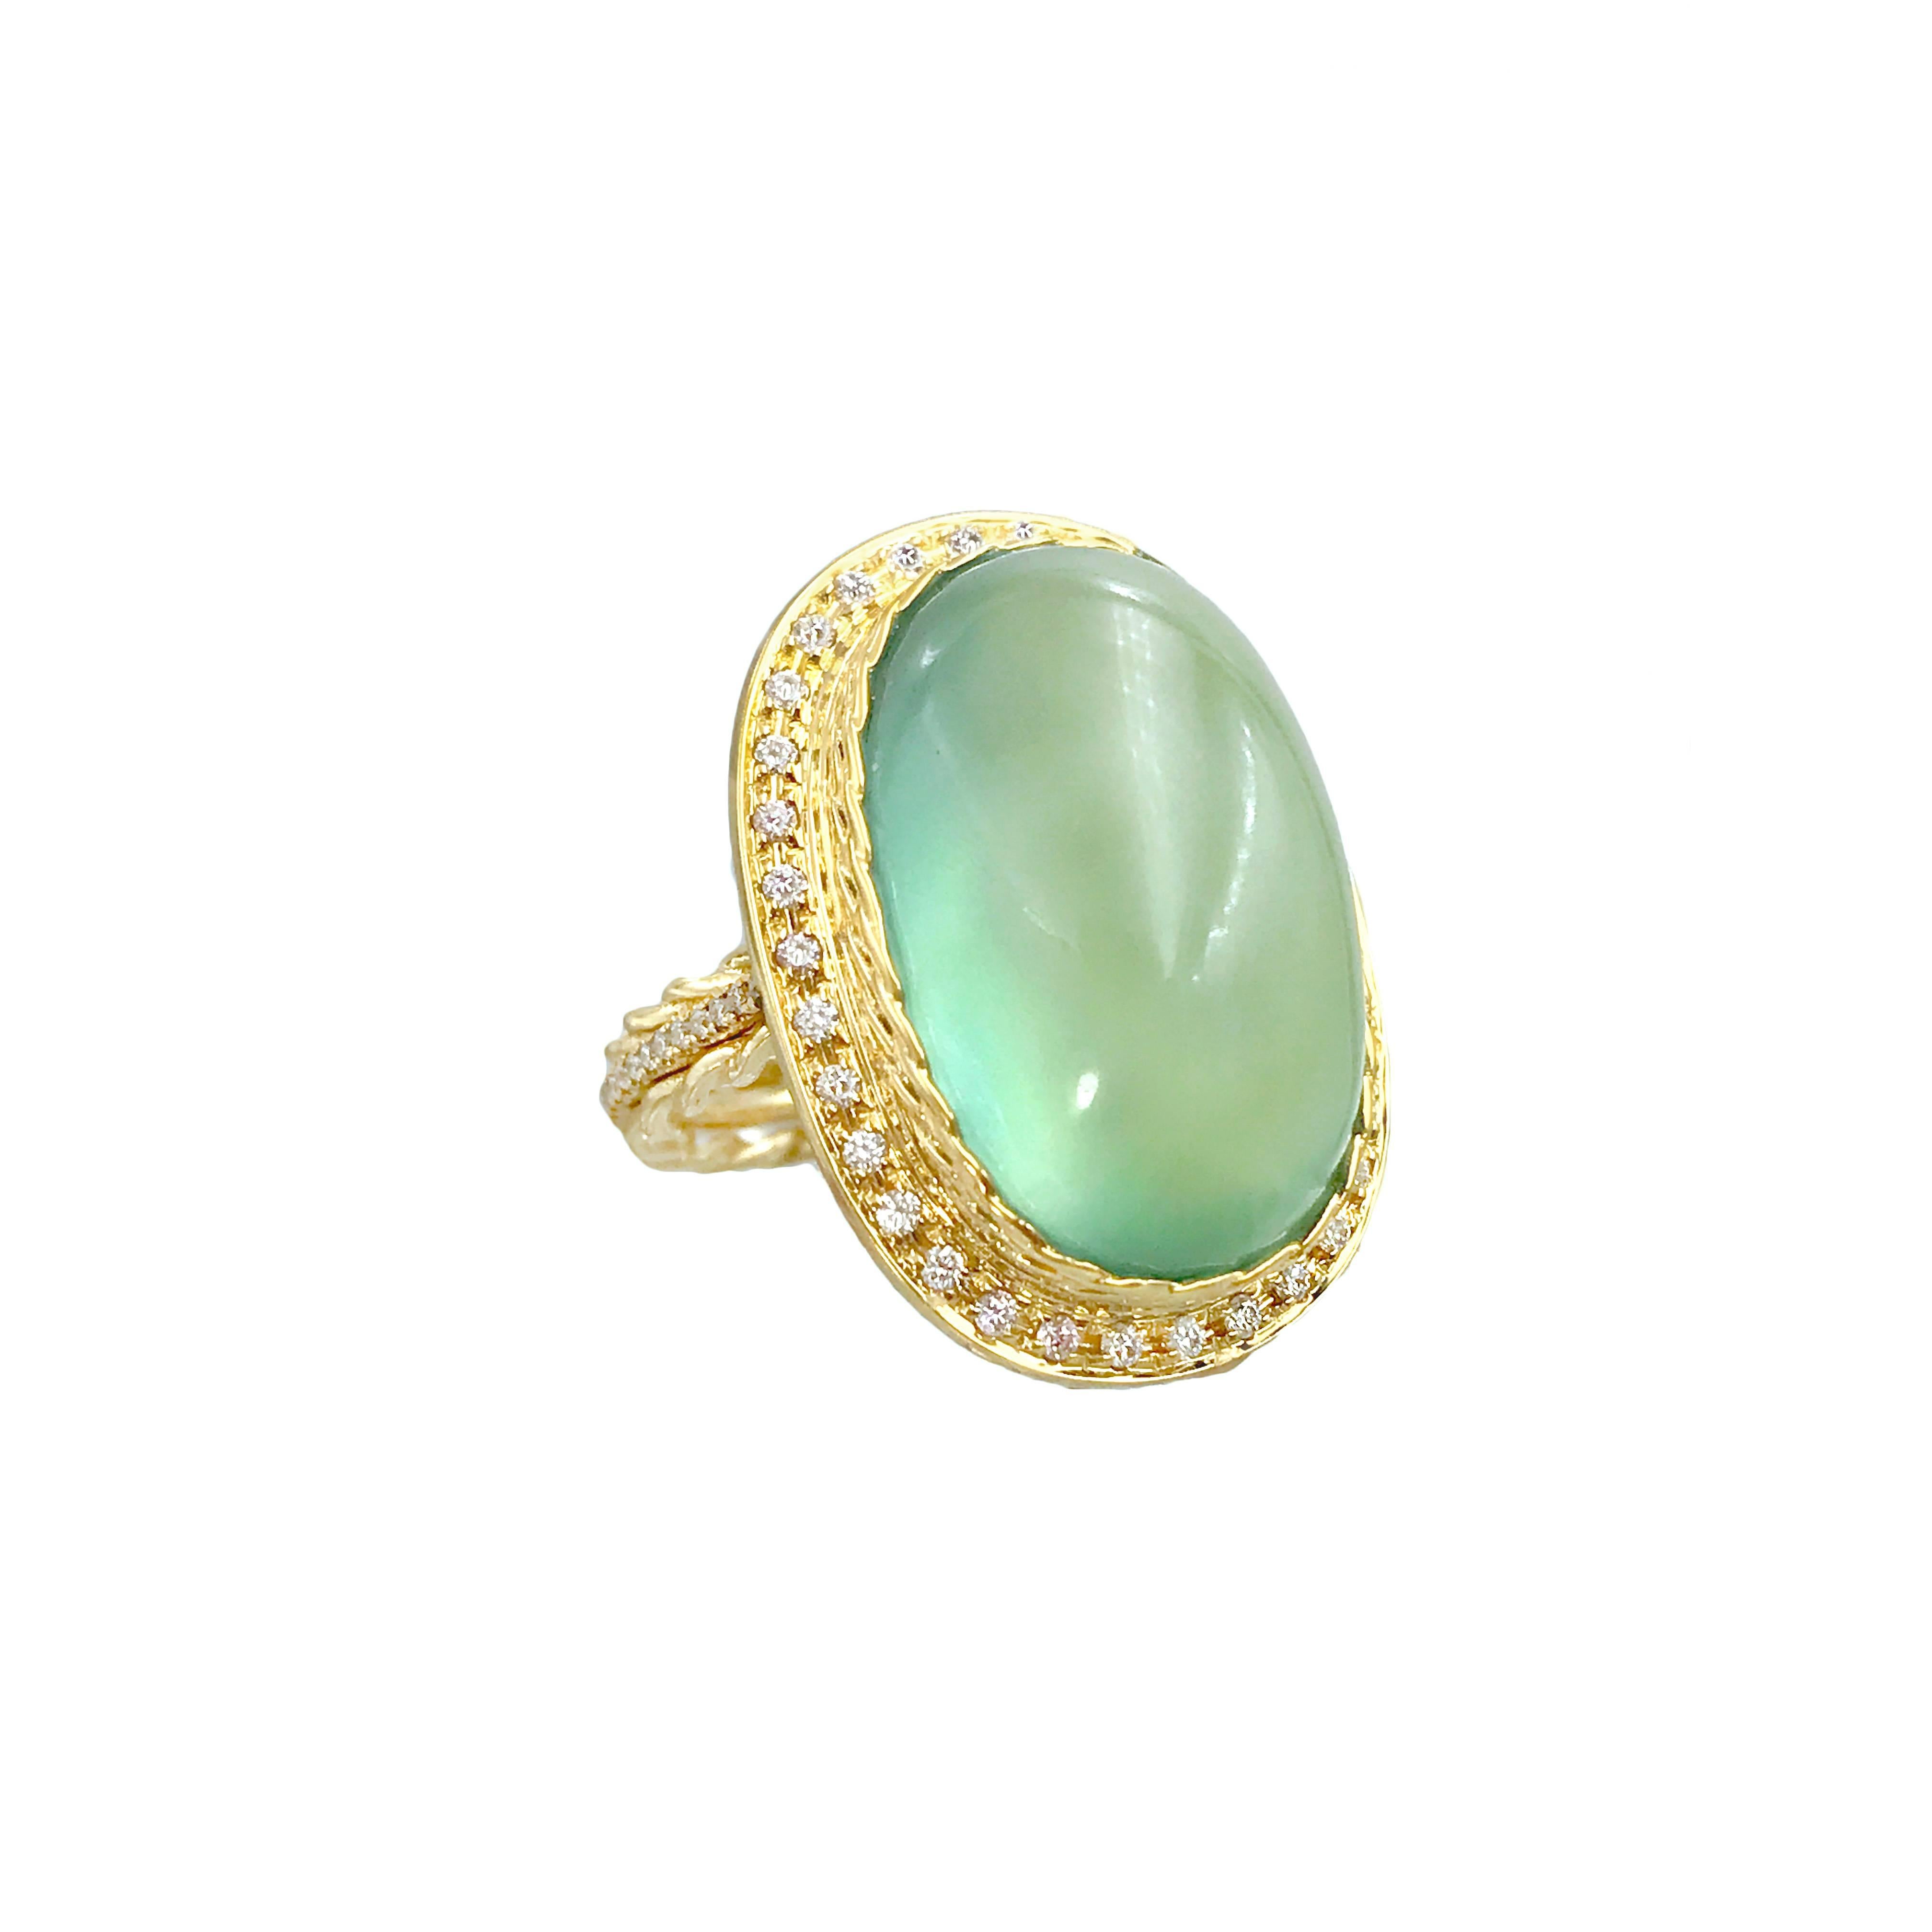 Prehnite Diamond Halo Cocktail Ring set in 18K Yellow Gold in size 6 with 0.629 CTW Diamonds. It's in stock and ready to ship.

This lovely prehnite cab is 18mm x 12mm, weight 16.14 CT, set in JeweLyrie signature double twist bezel, halo-ed with 86